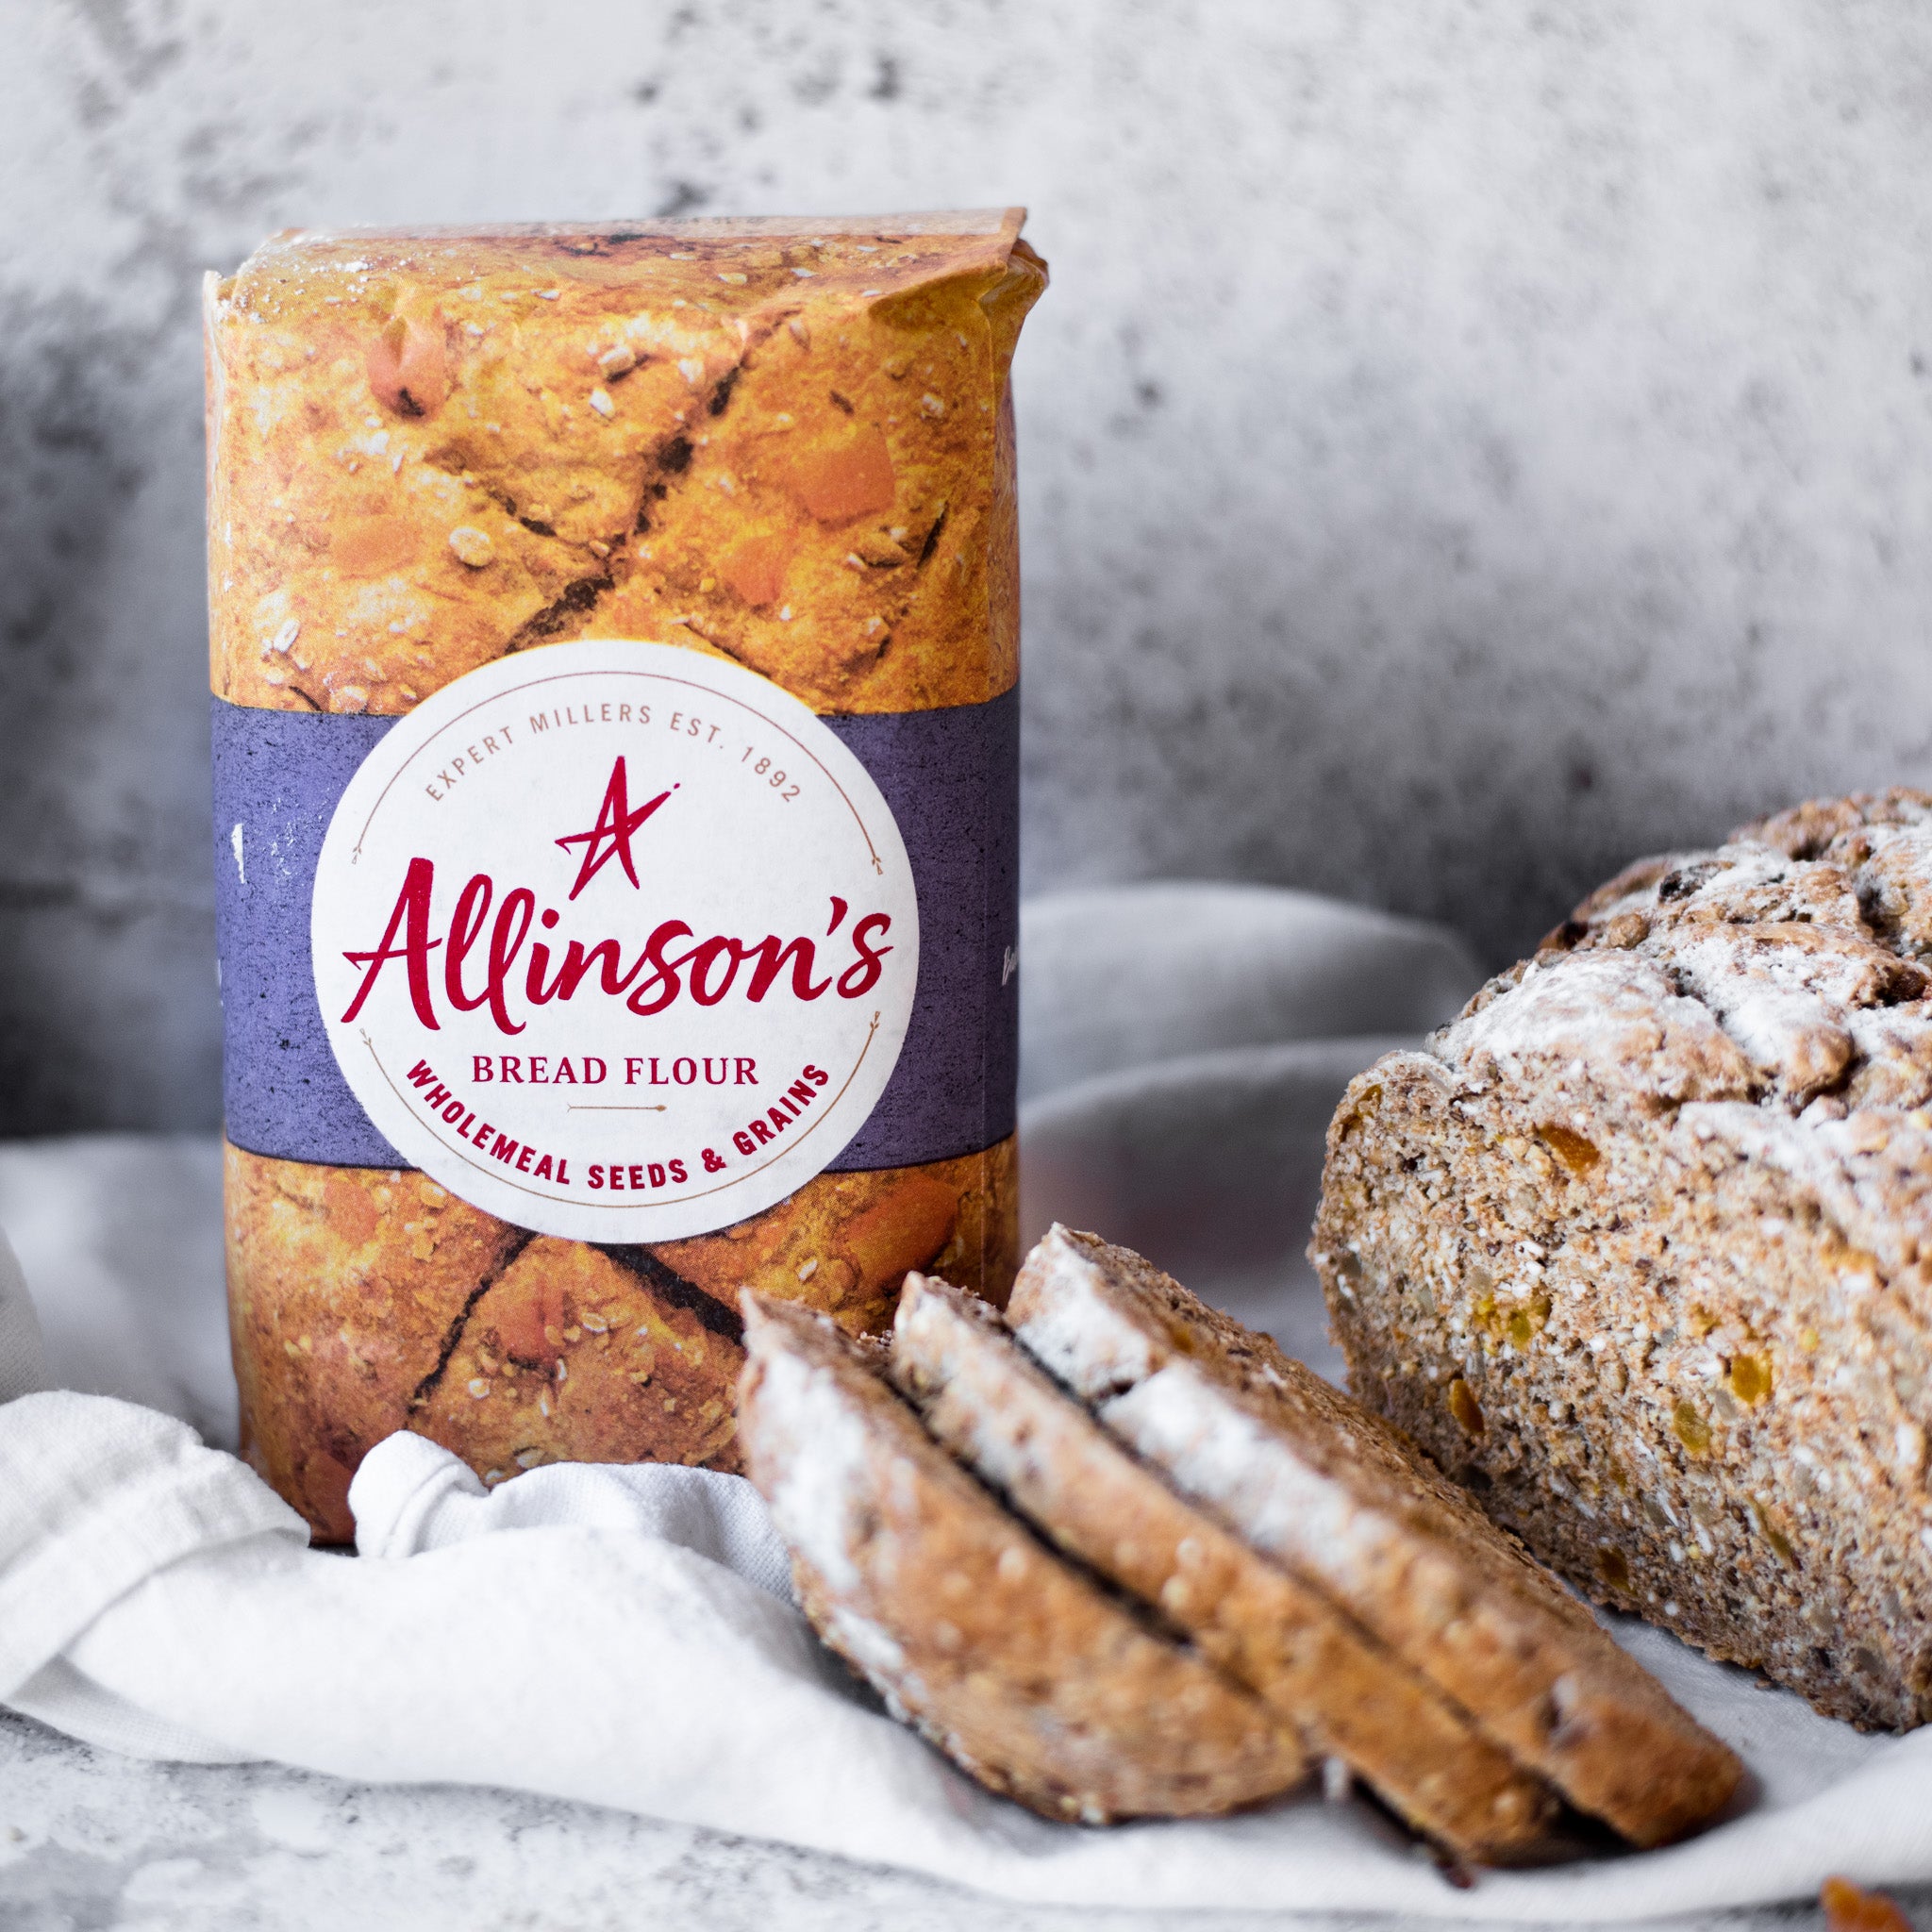 Wholemeal-Seed-Grain-Apricot-Loaf-by-Allinson-s-(9).jpg